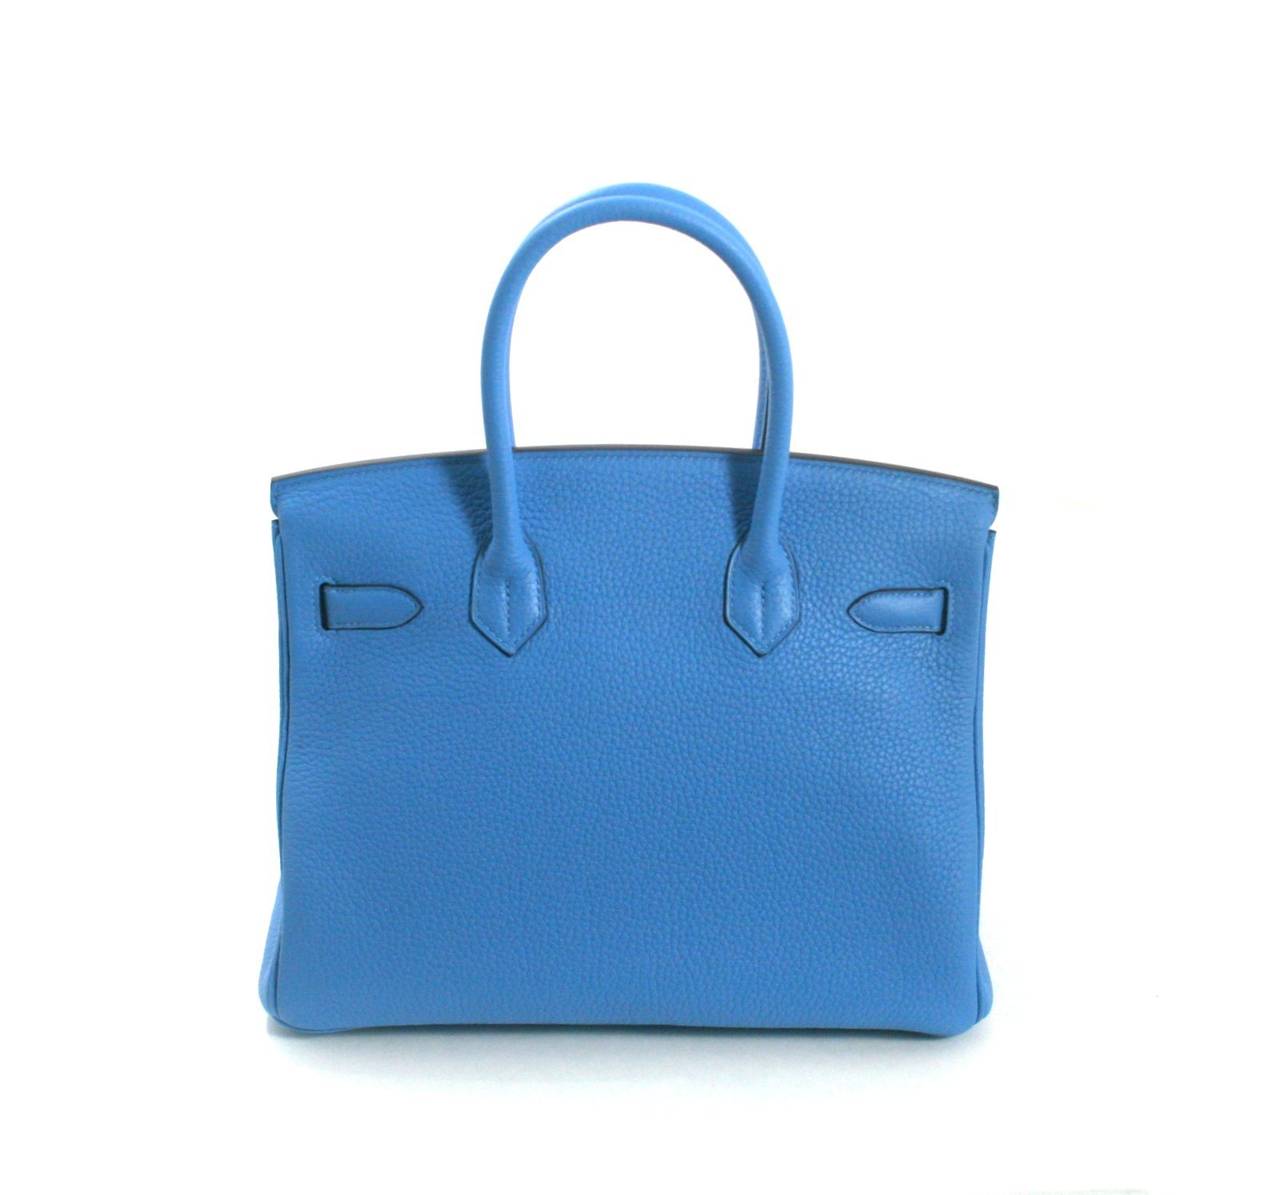 This  Bleu Paradis Clemence Leather 35 cm Birkin is in the newest shade of blue from Hermès. It has been carefully stored with the protective felt and is absolutely immaculate. Considered the ultimate luxury item the world over and hand stitched by